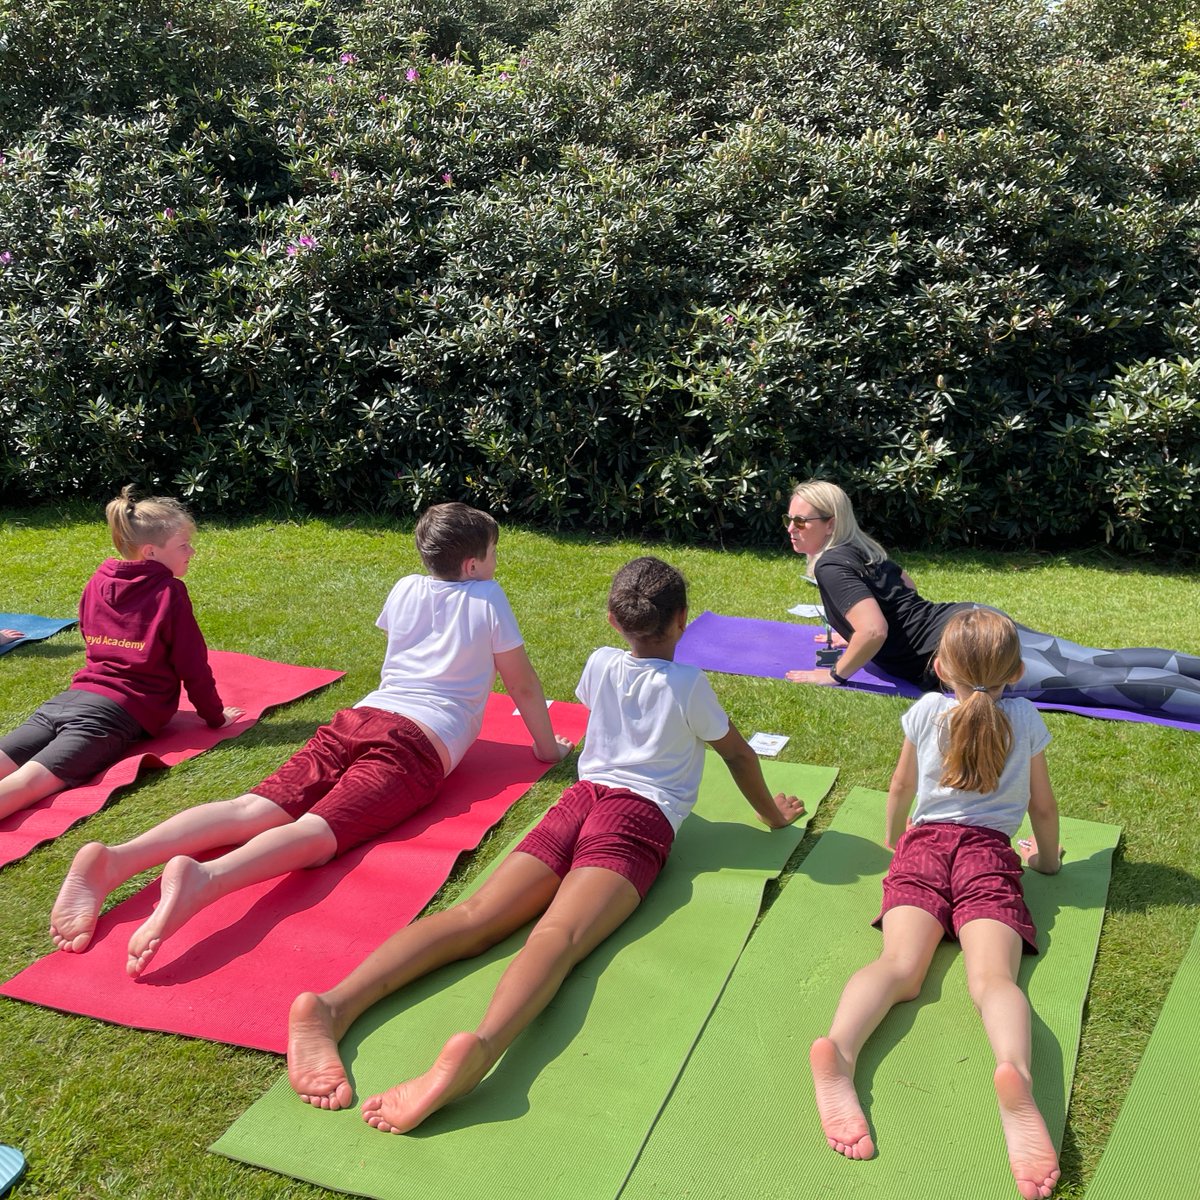 It was our pleasure to host the Alpha Academies Trust at Packwood today for a range of outdoor activities including yoga, team building and kite flying. A glorious day in the Shropshire sunshine. #PowerOfPartnerships